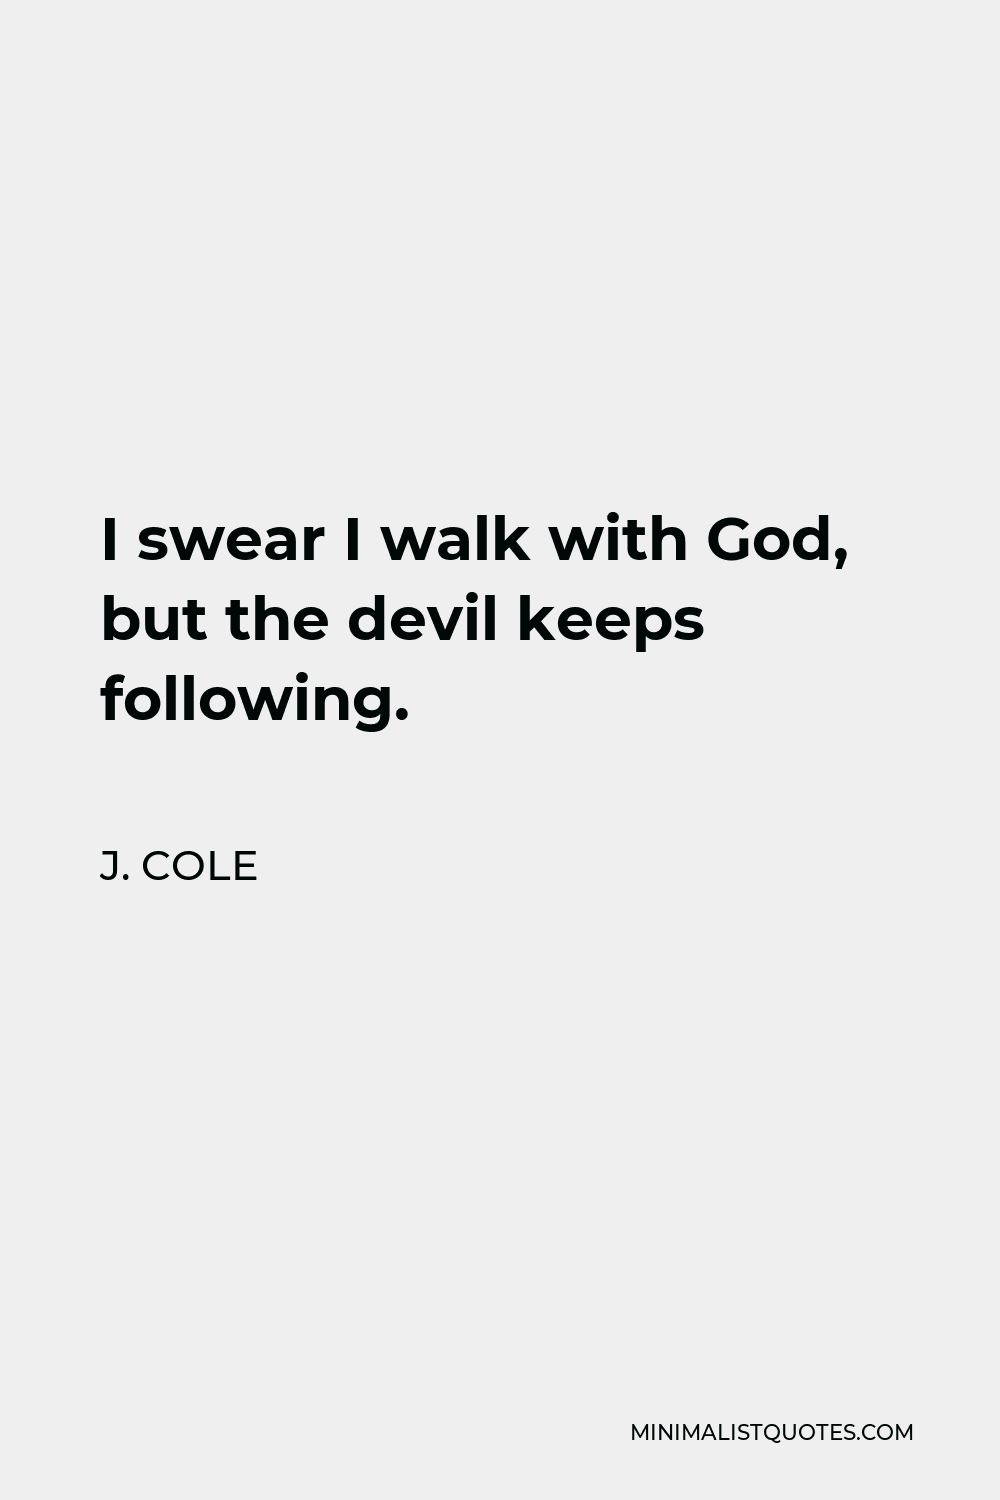 J. Cole Quote - I swear I walk with God, but the devil keeps following.